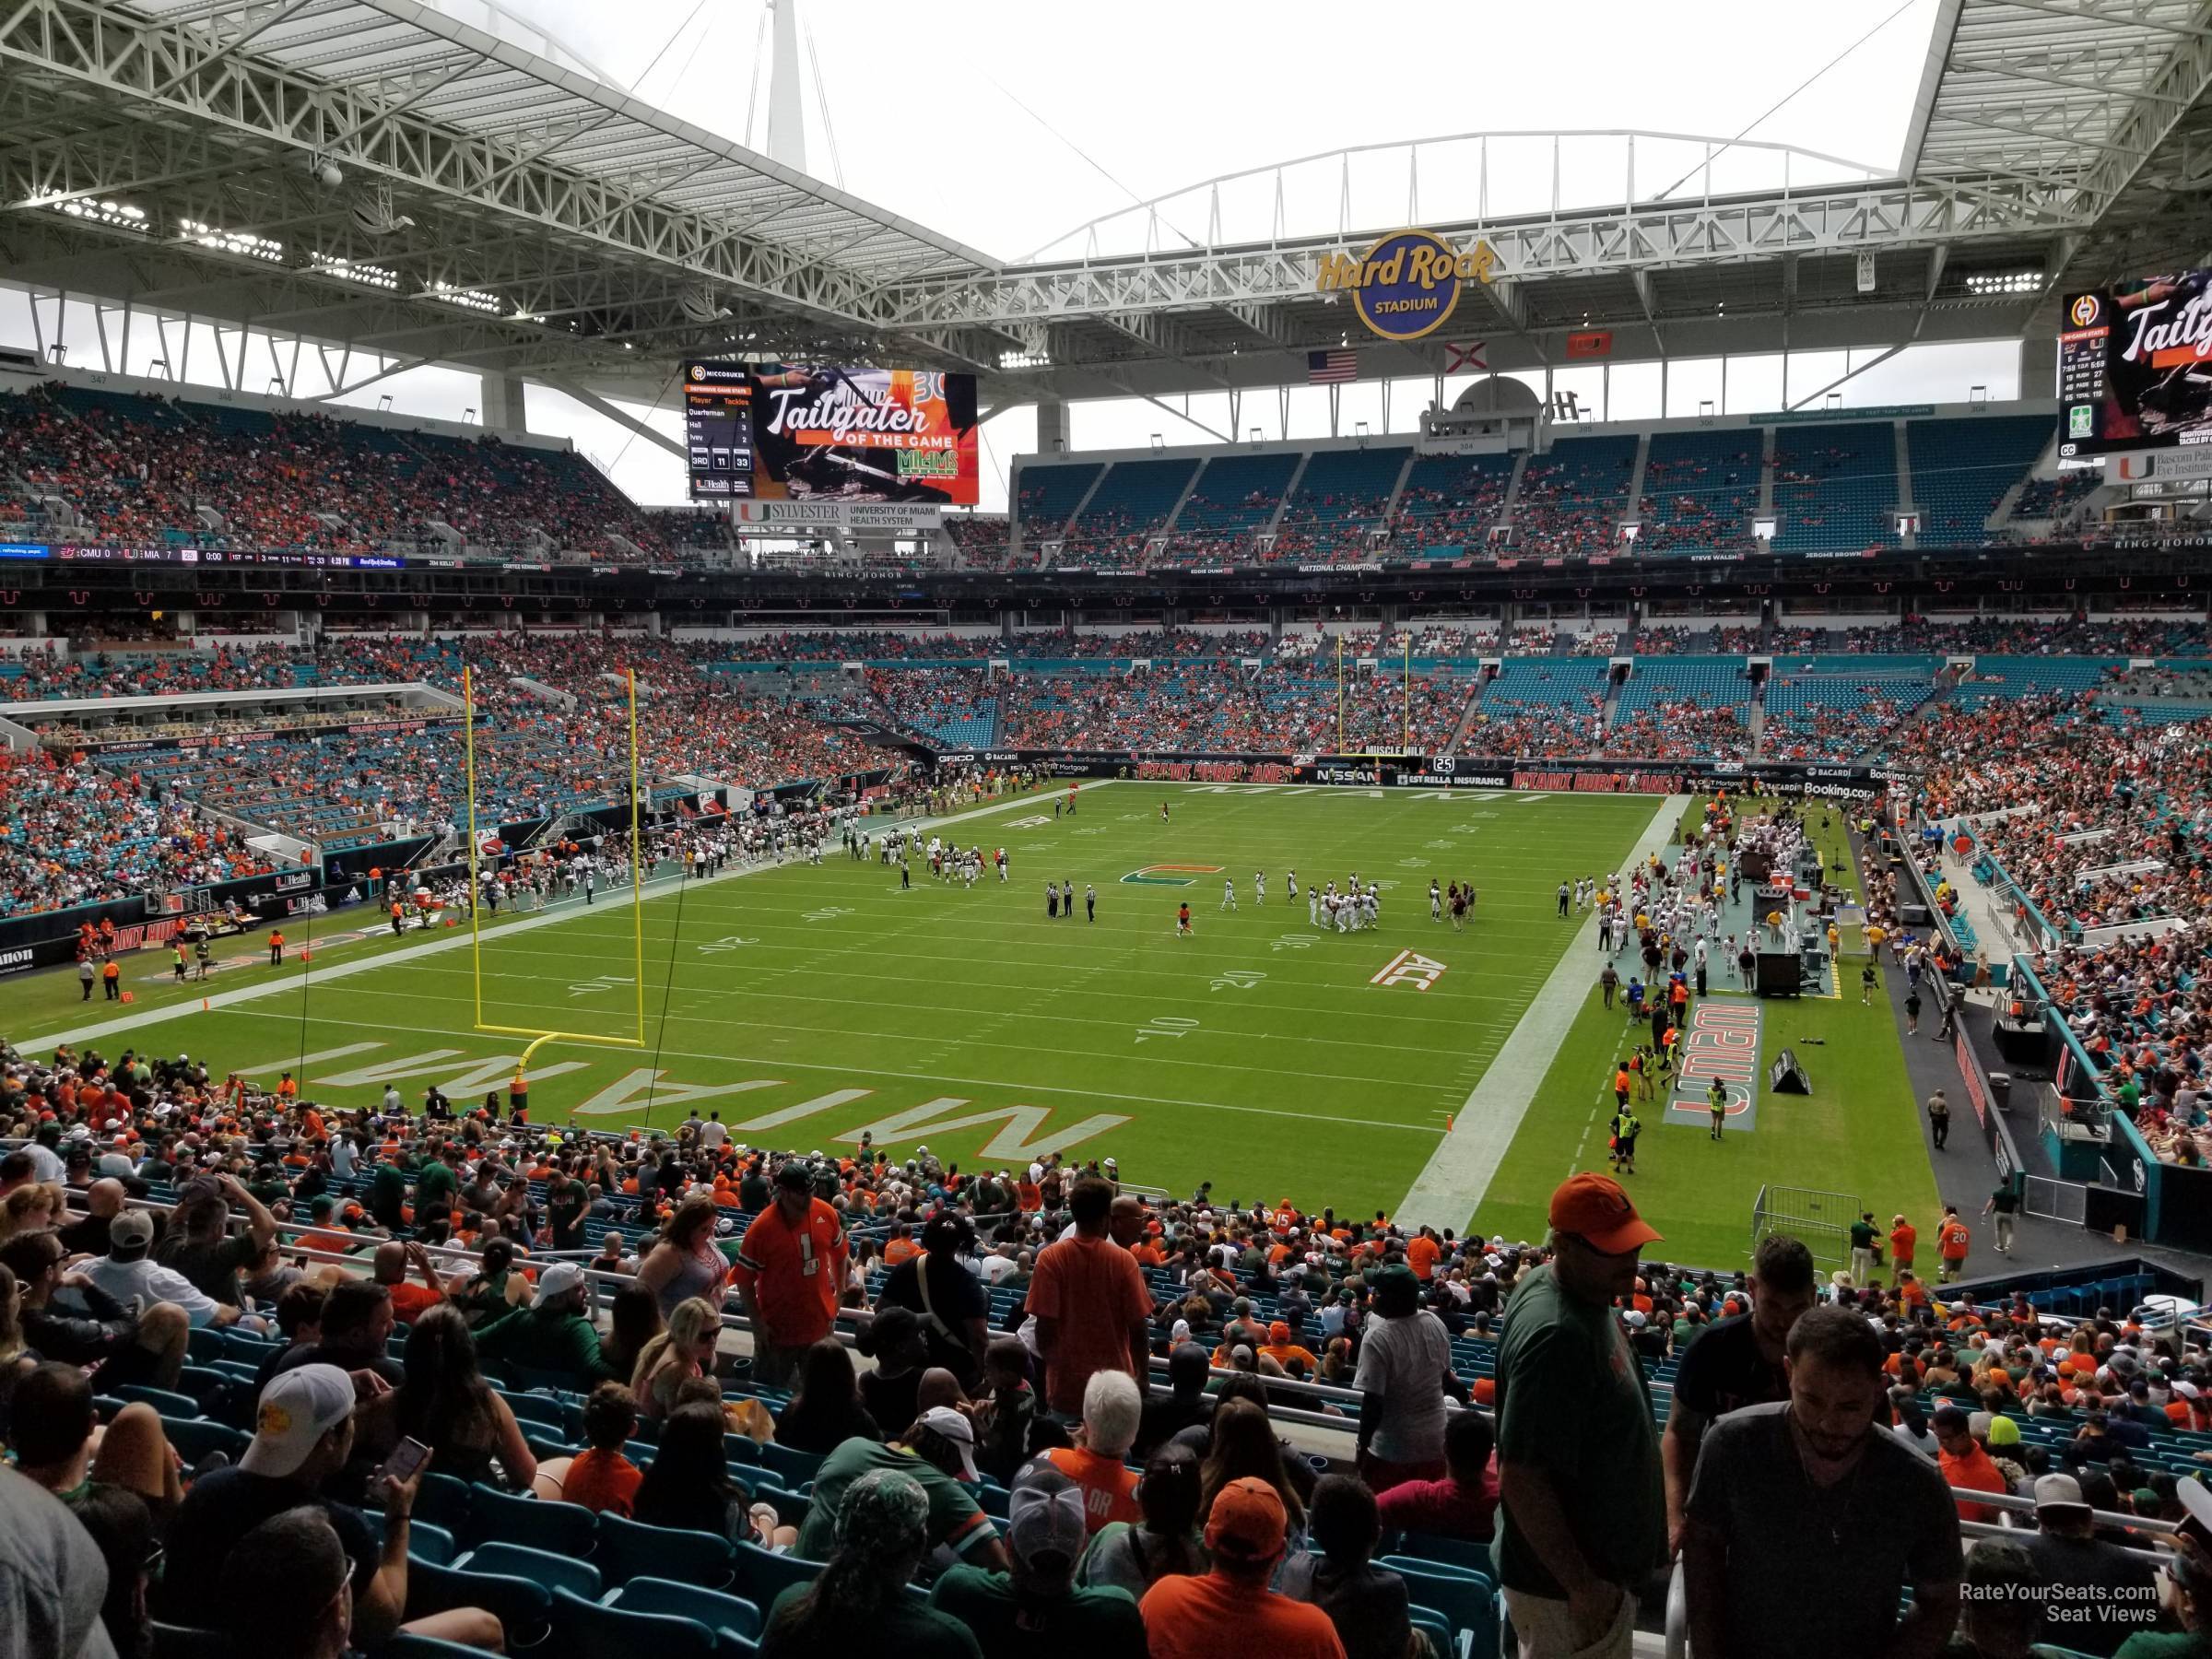 section 230, row 10 seat view  for football - hard rock stadium